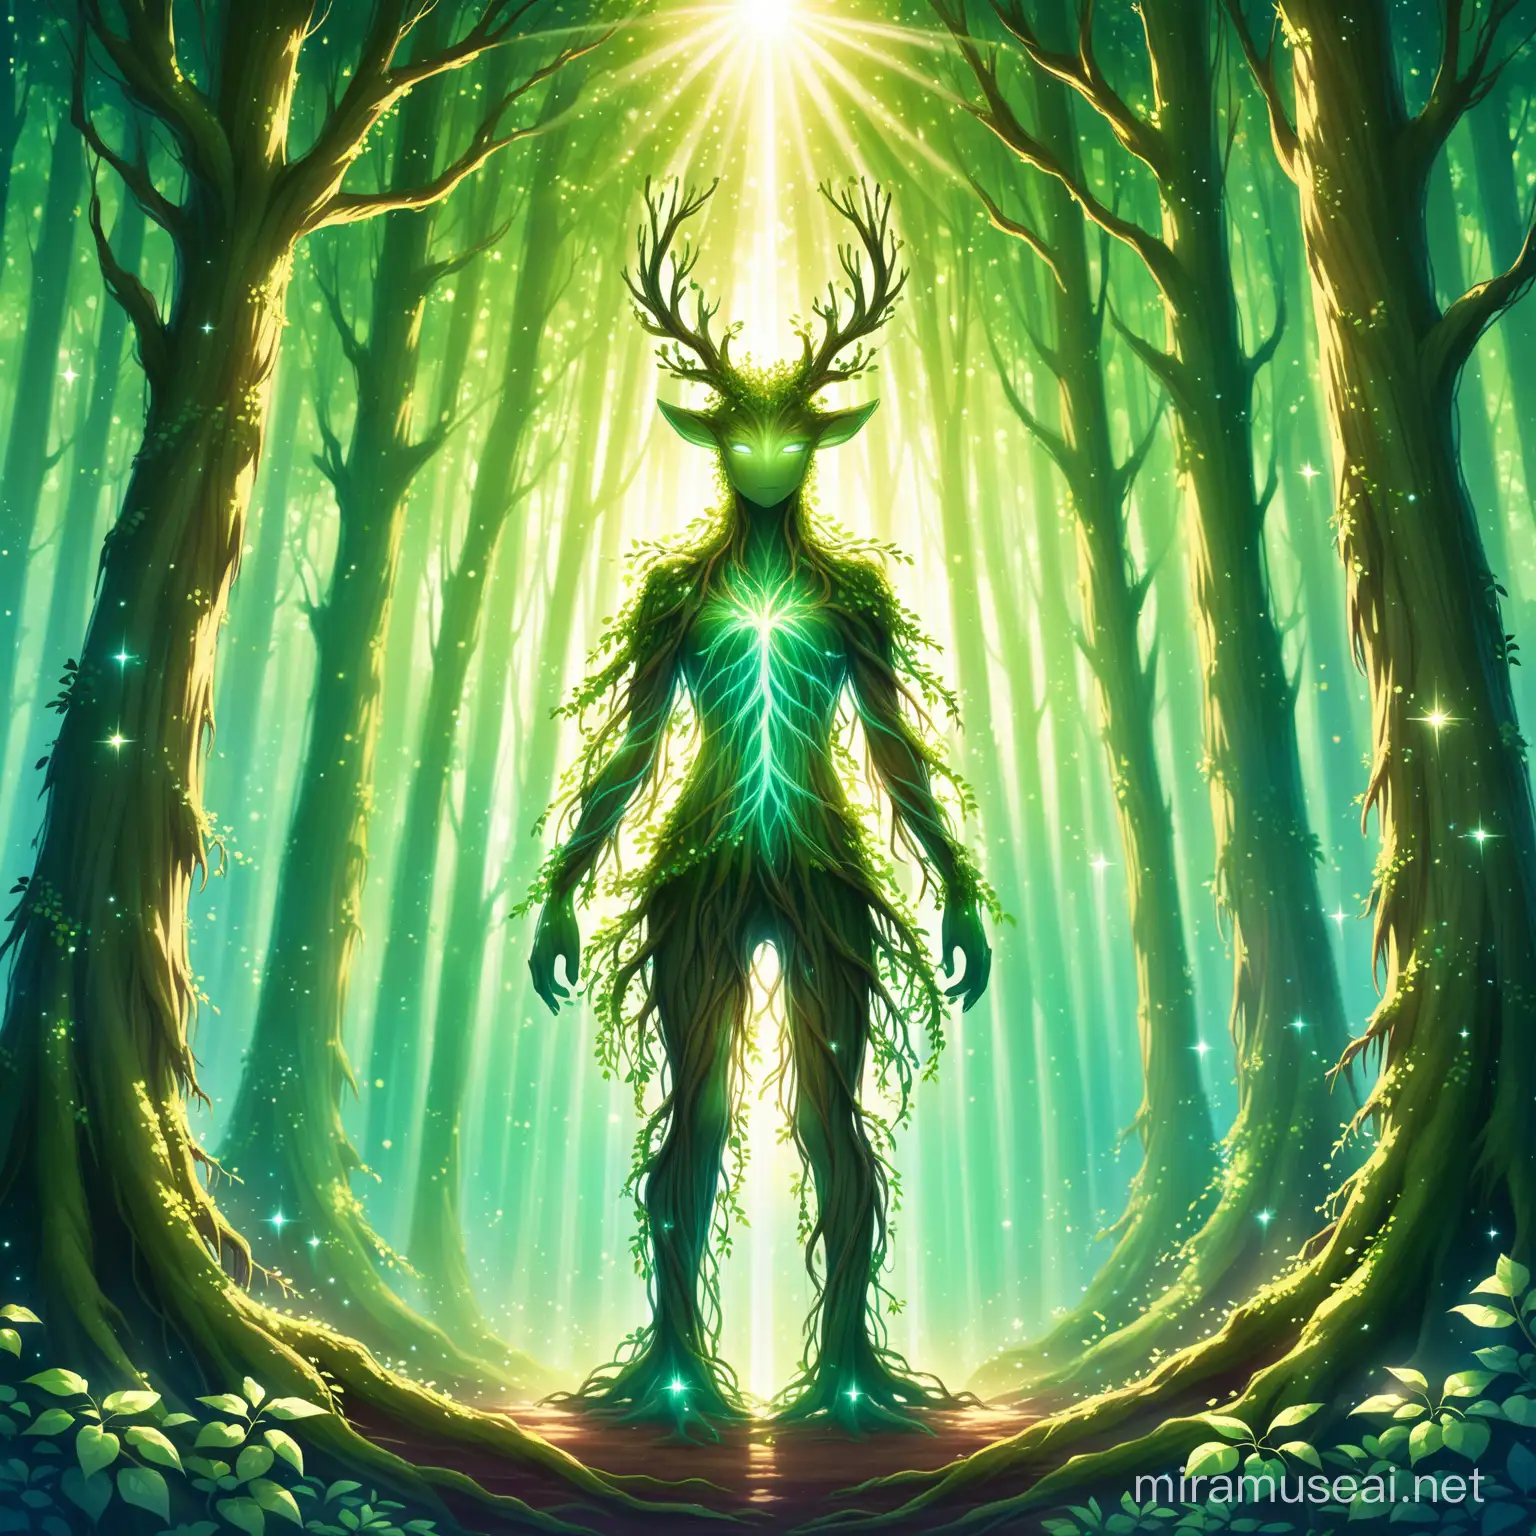 a forest spirit made of trees is standing in the middle of a forest, they have roots and branches all over them and roots for arms and legs. Their arm roots are connected to other forest tree spirits and there is magic sparkles and energy in the air. It is daytime with sunlight shining through the trees.